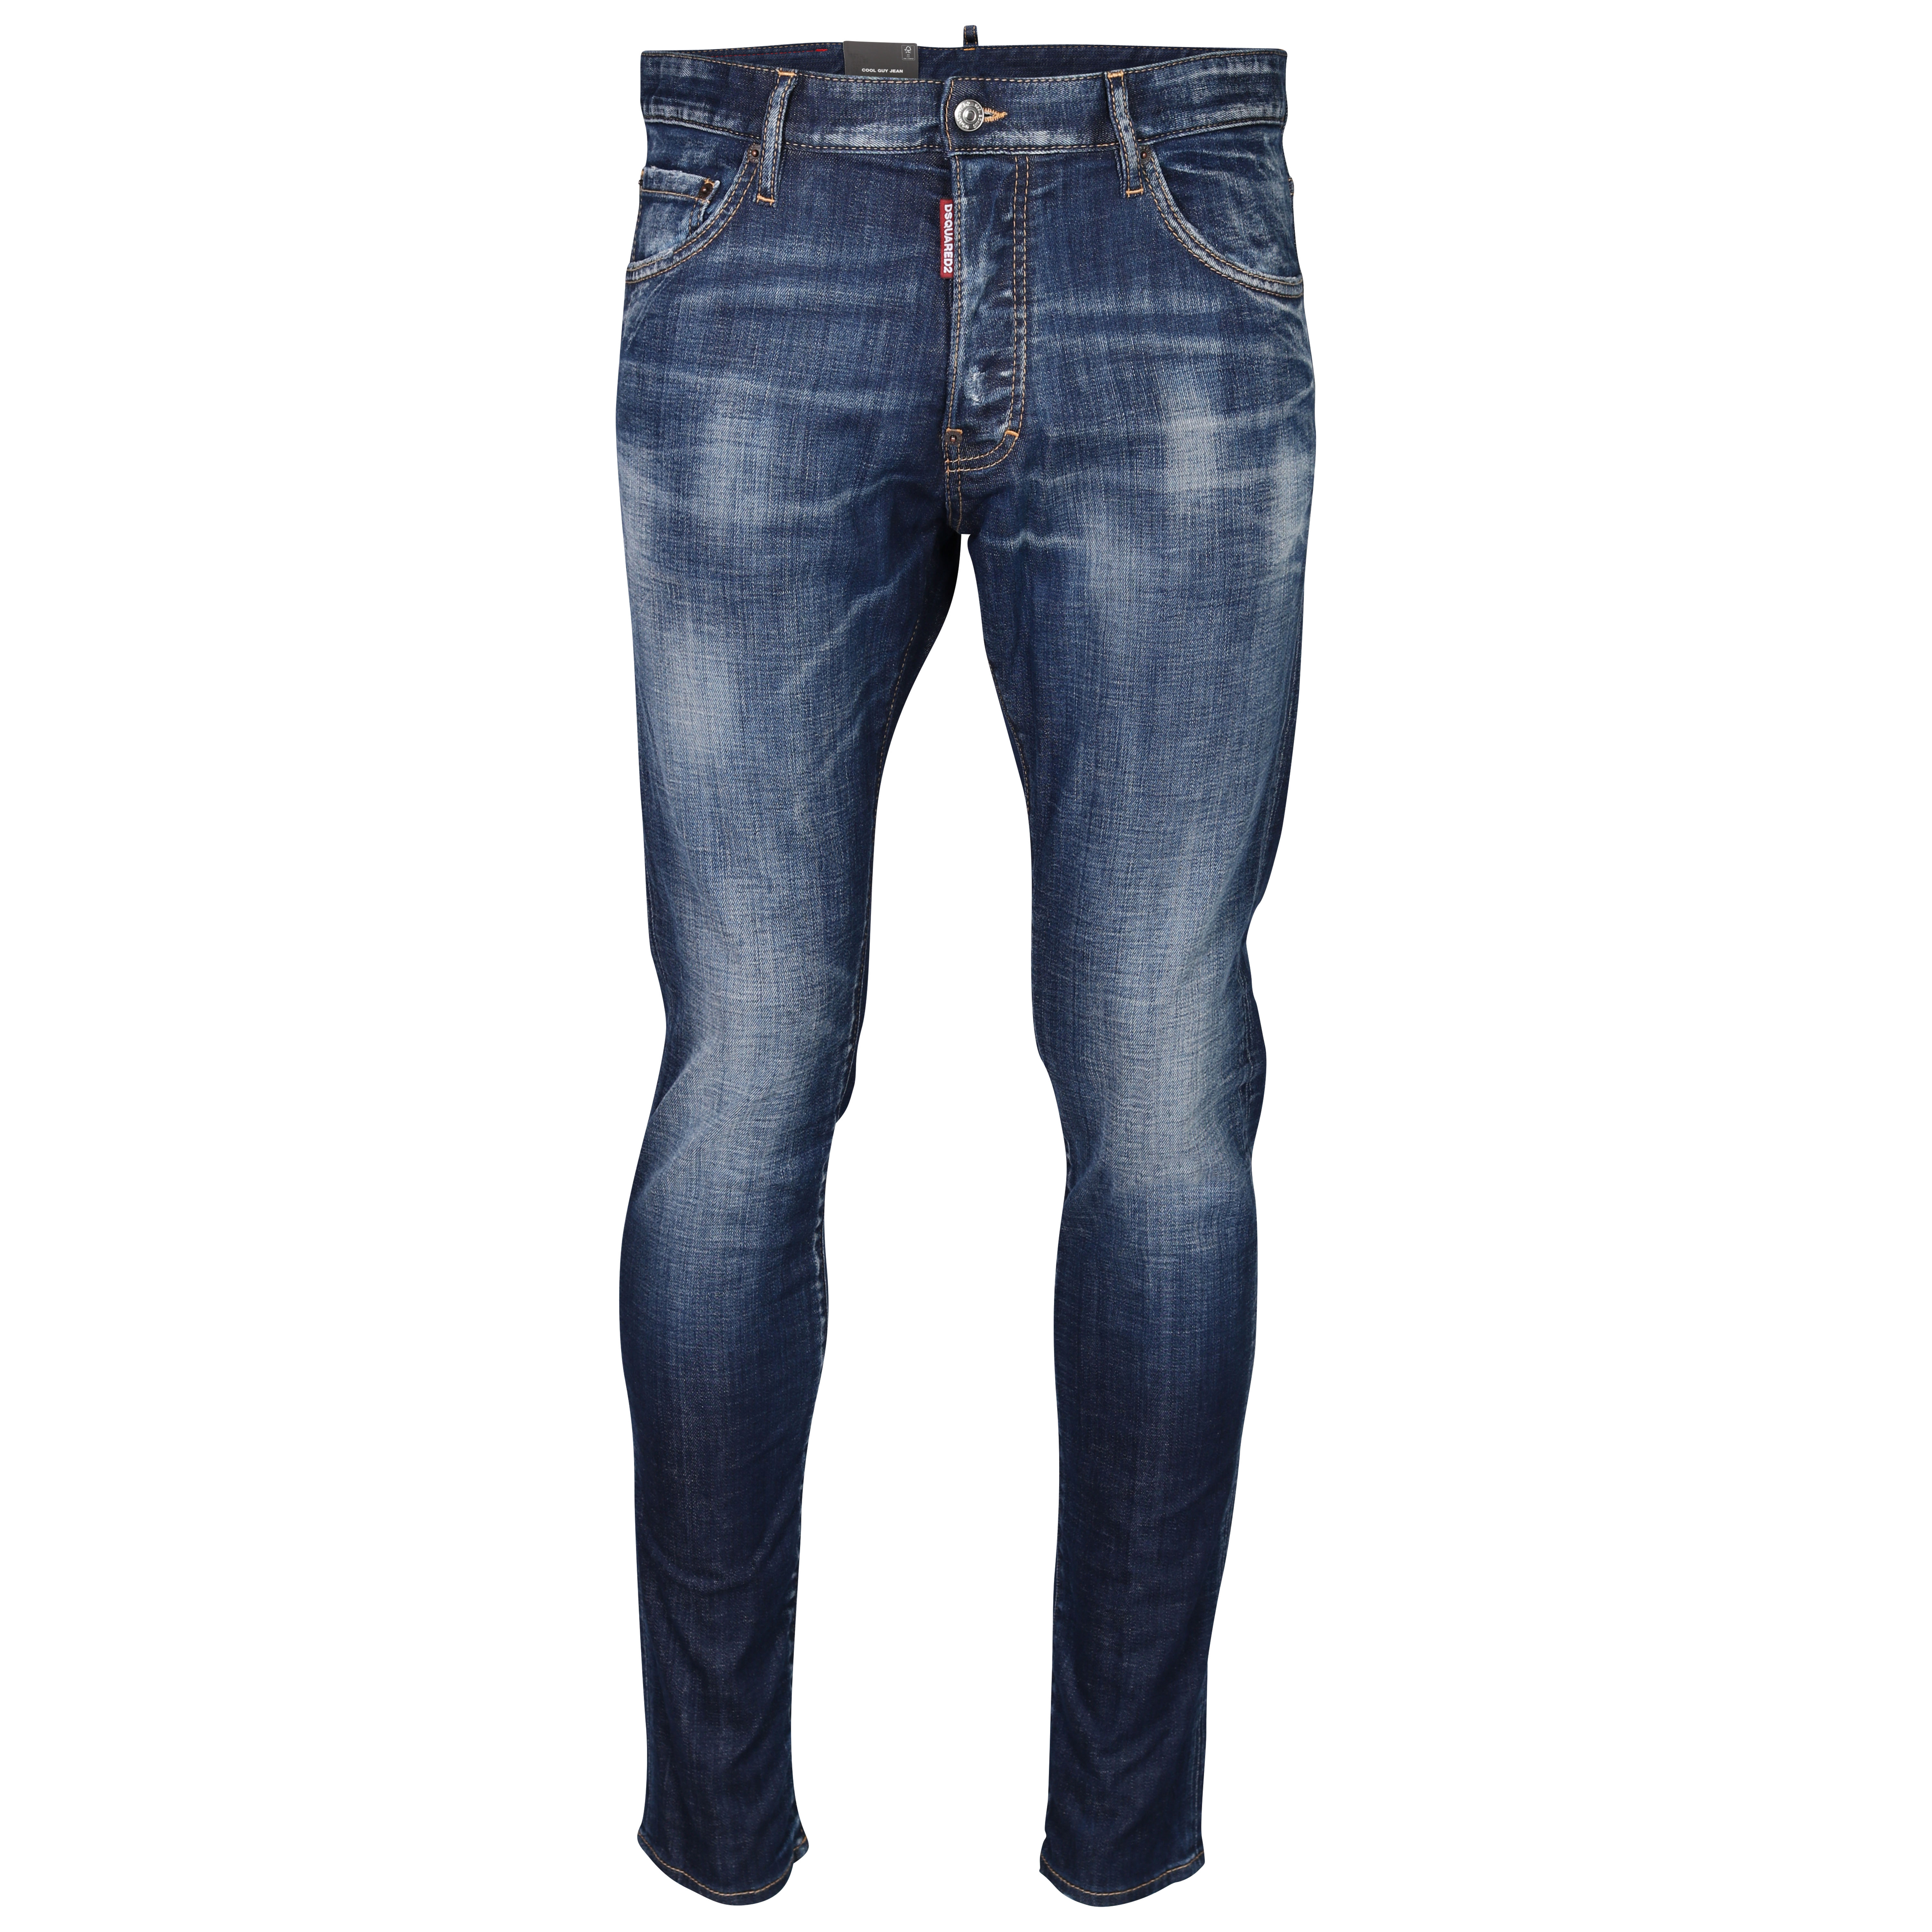 Dsquared Cool Guy Jean in Blue Wash 56